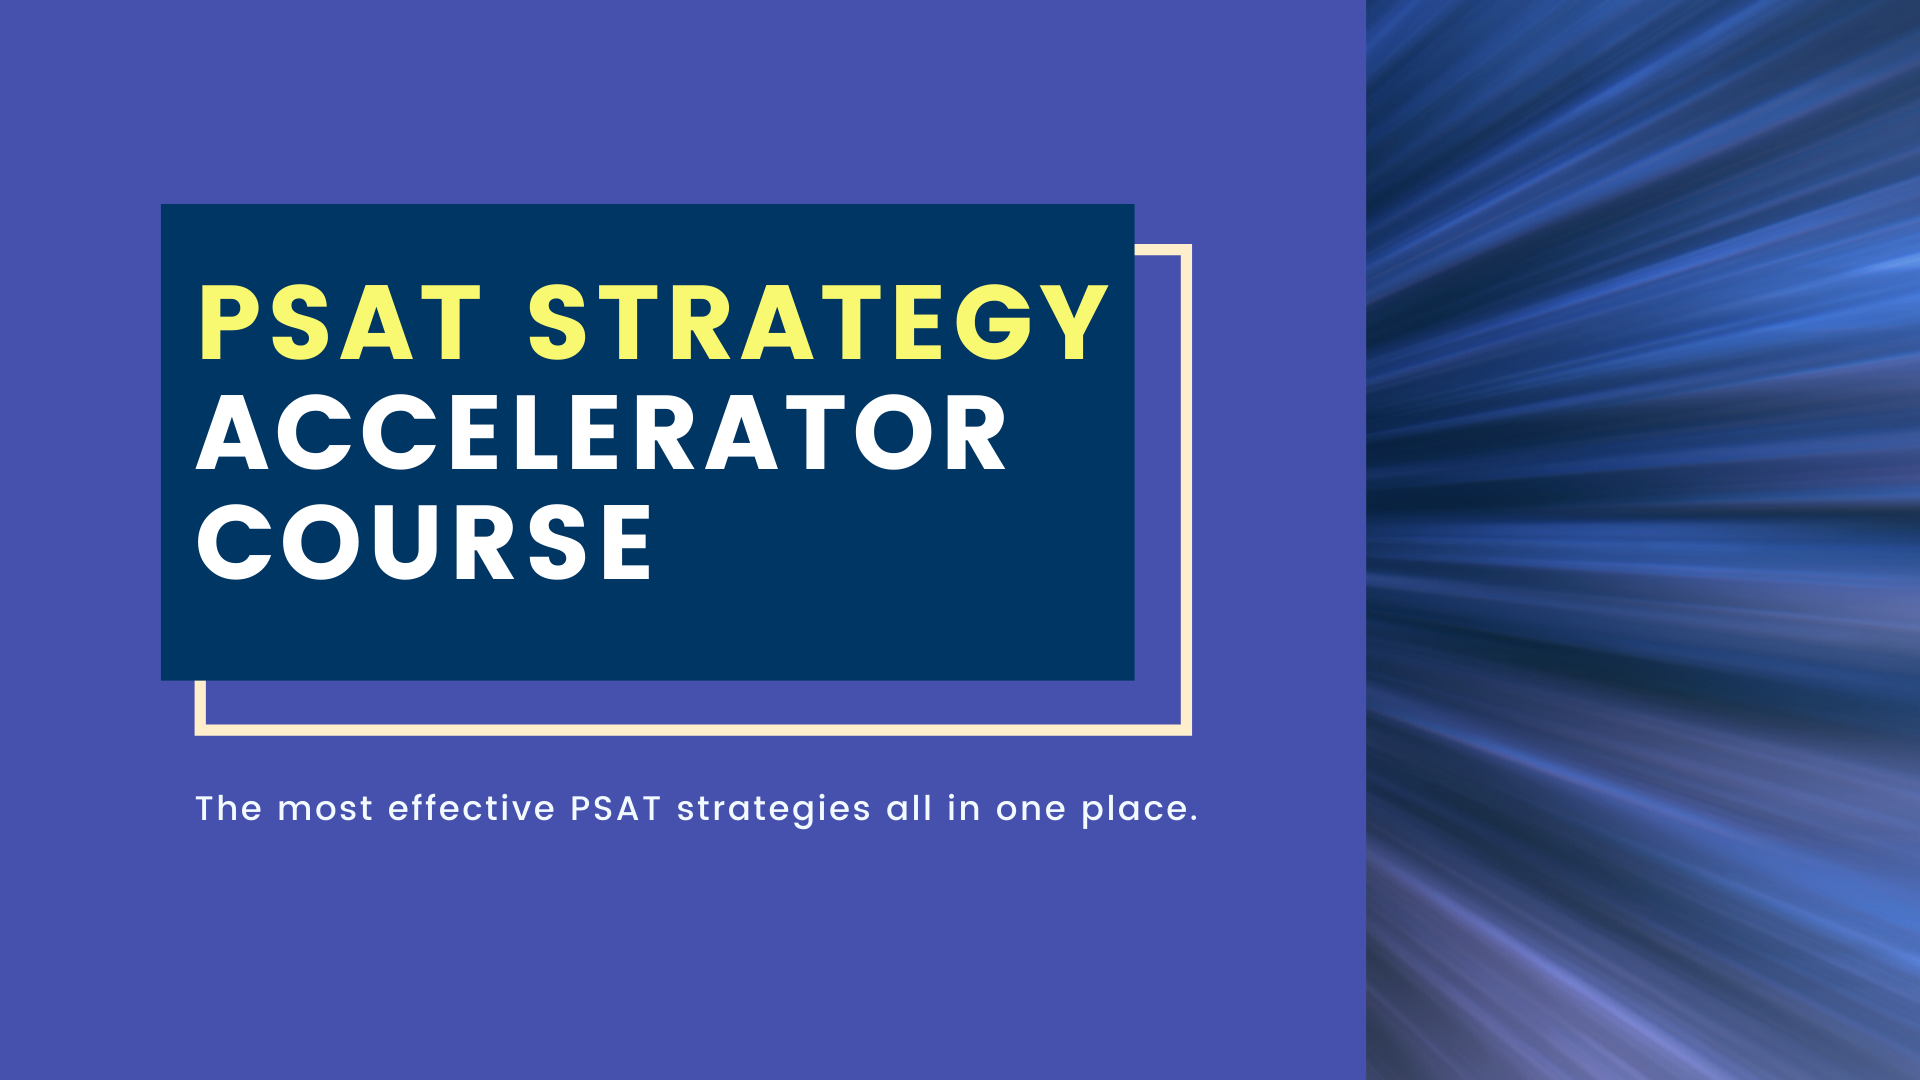 PSAT Strategy Accelerator Video Course from Nick the Tutor and Curvebreakers